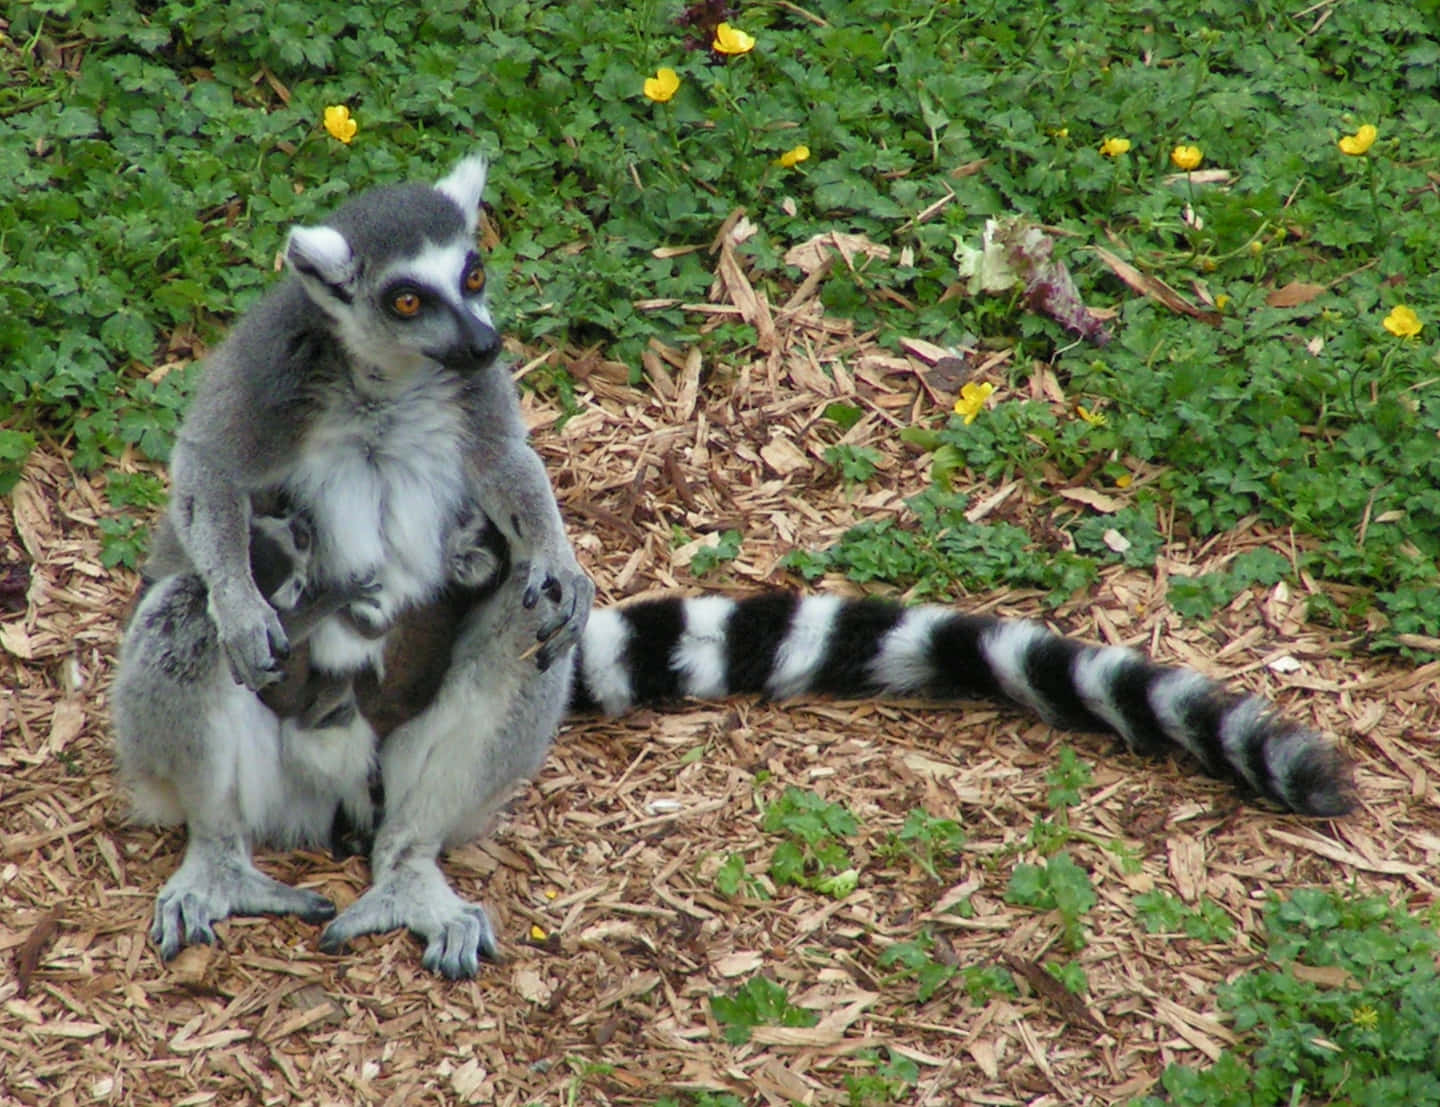 A Ring-tailed Lemur In Its Natural Habitat